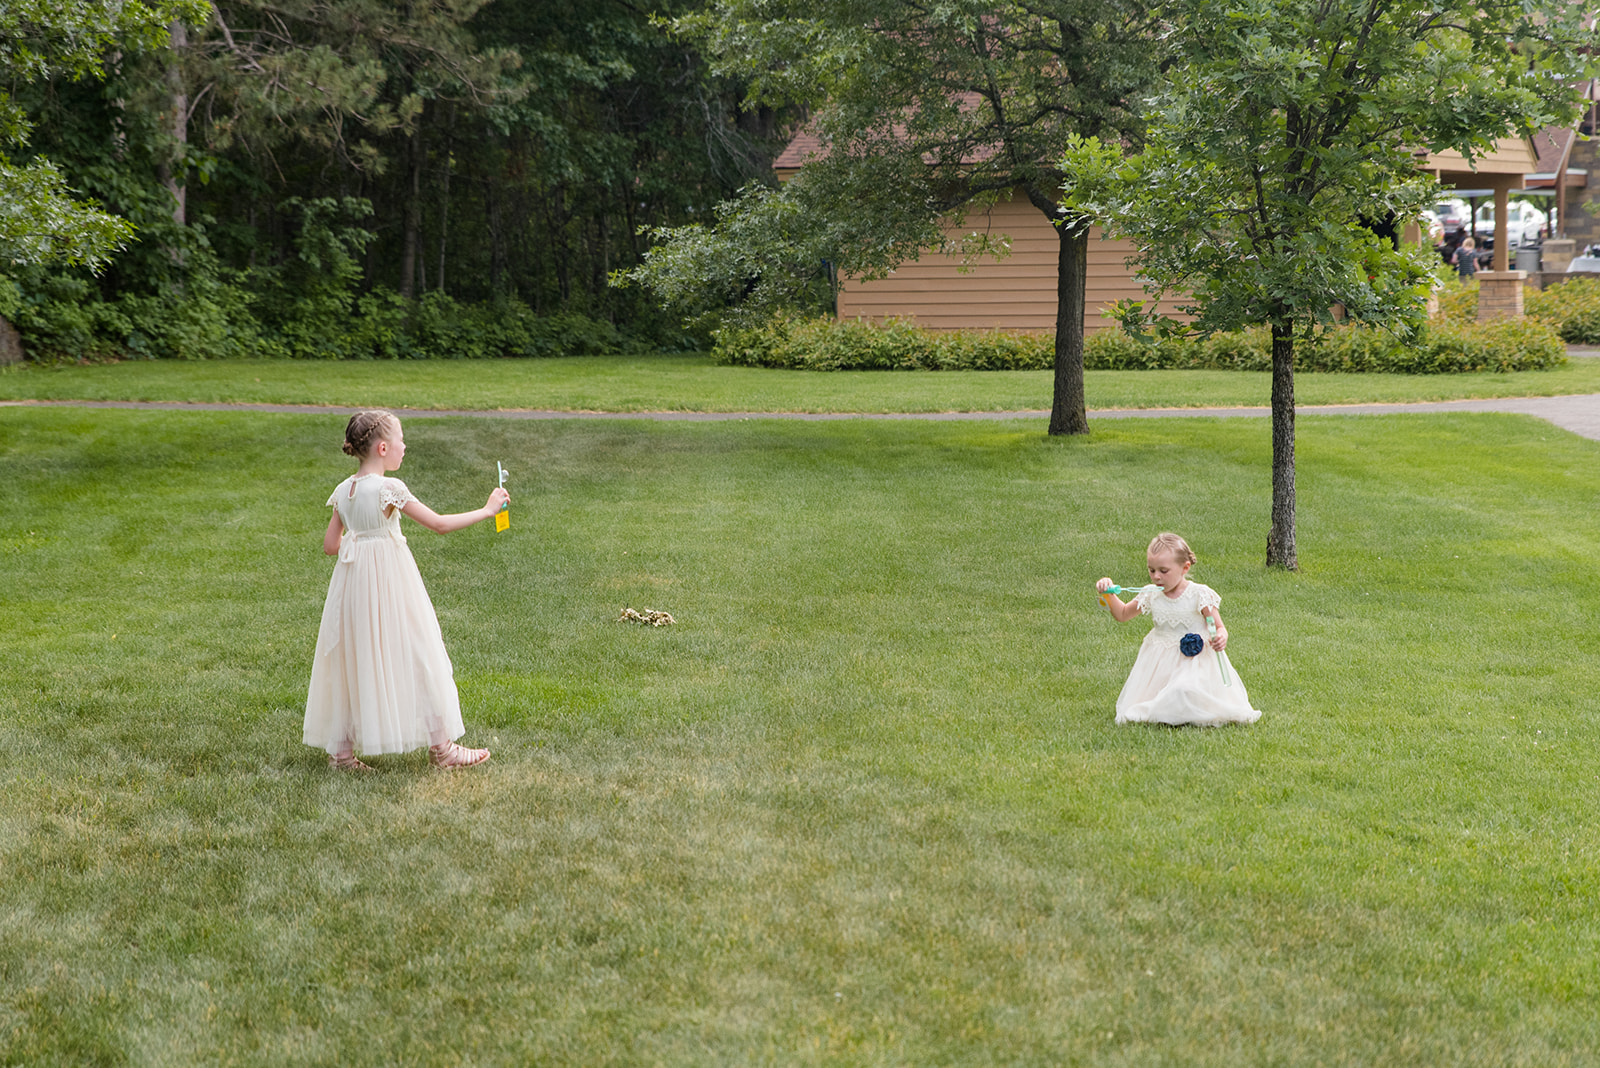 Flower girls playing in the park